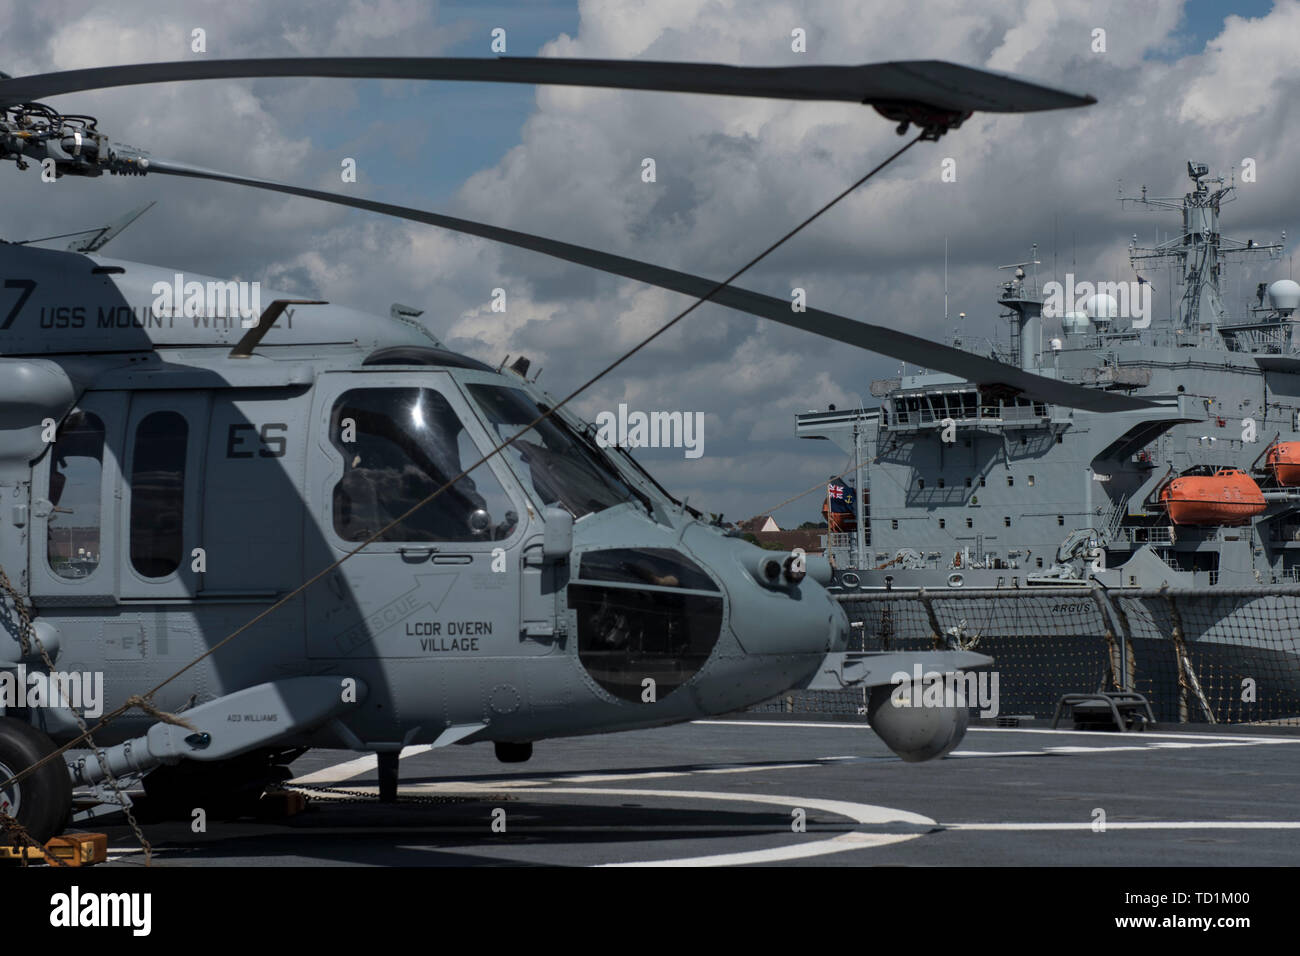 190609-N-DP001-0065 BALTIC SEA (June 09, 2019) An MH-60S Seahawk Helicopter assigned to DET 1 (Ghostriders) of Helicopter Sea Combat Squadron (HSC) 28, the Dragon Whales, awaits on the deck of the Blue Ridge-class command and control ship USS Mount Whitney (LCC 20) as the ship gets underway in support of exercise Baltic Operations (BALTOPS) 2019. BALTOPS is the premier annual maritime-focused exercise in the Baltic Region, marking the 47th year of one of the largest exercises in Northern Europe enhancing flexibility and interoperability among allied and partner nations. (U.S. Navy photo by Mas Stock Photo